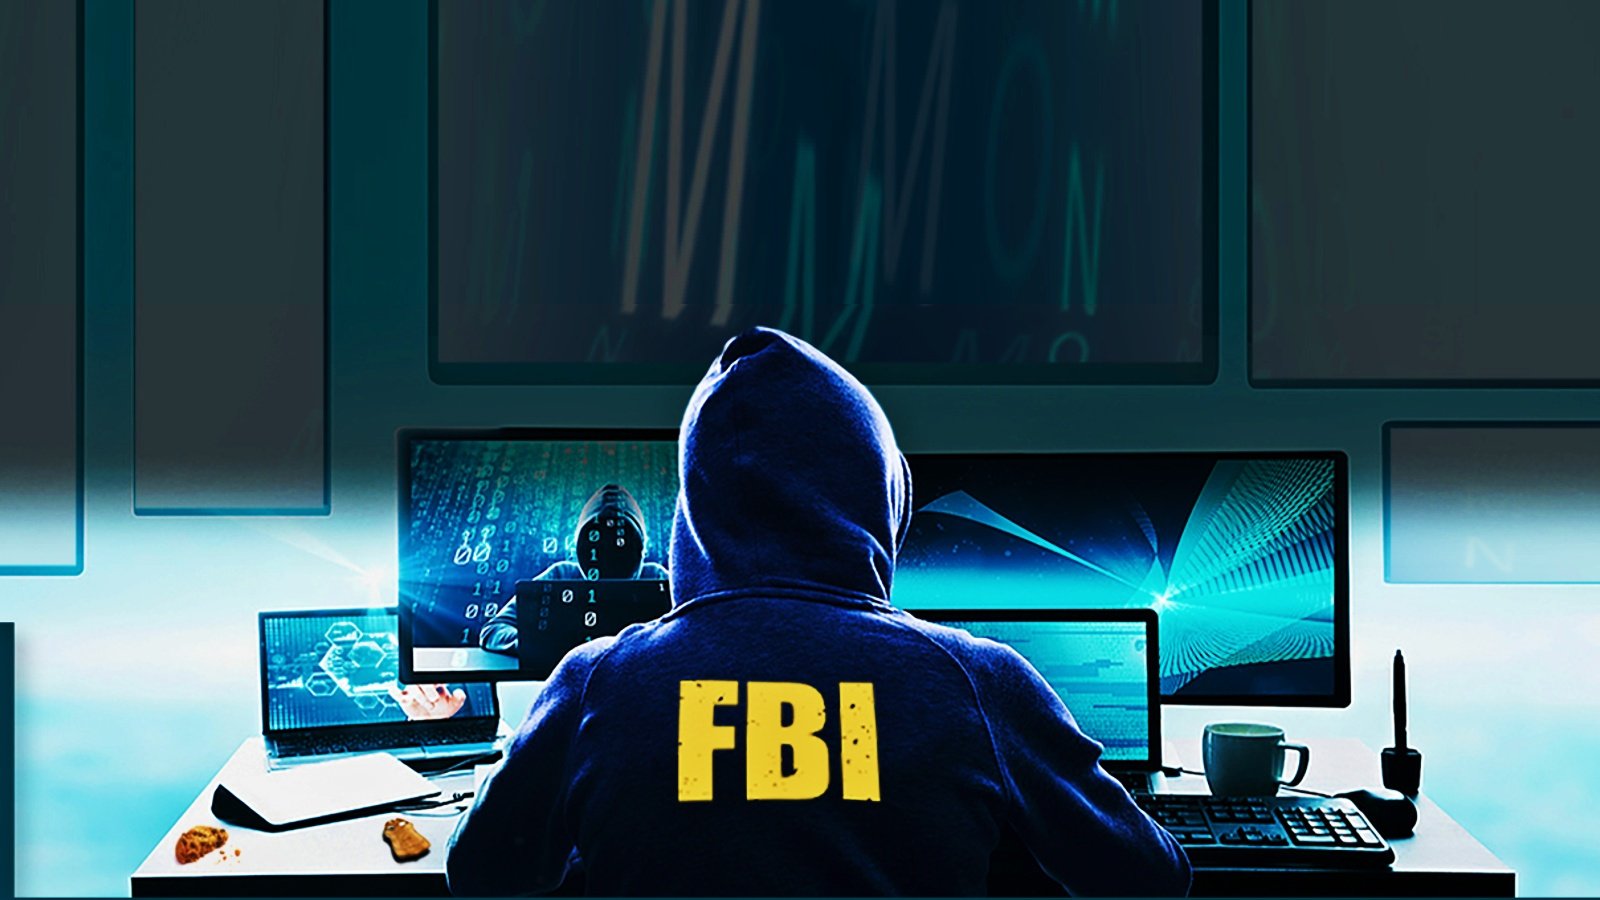 FBI disrupts Chinese botnet by wiping malware from infected routers